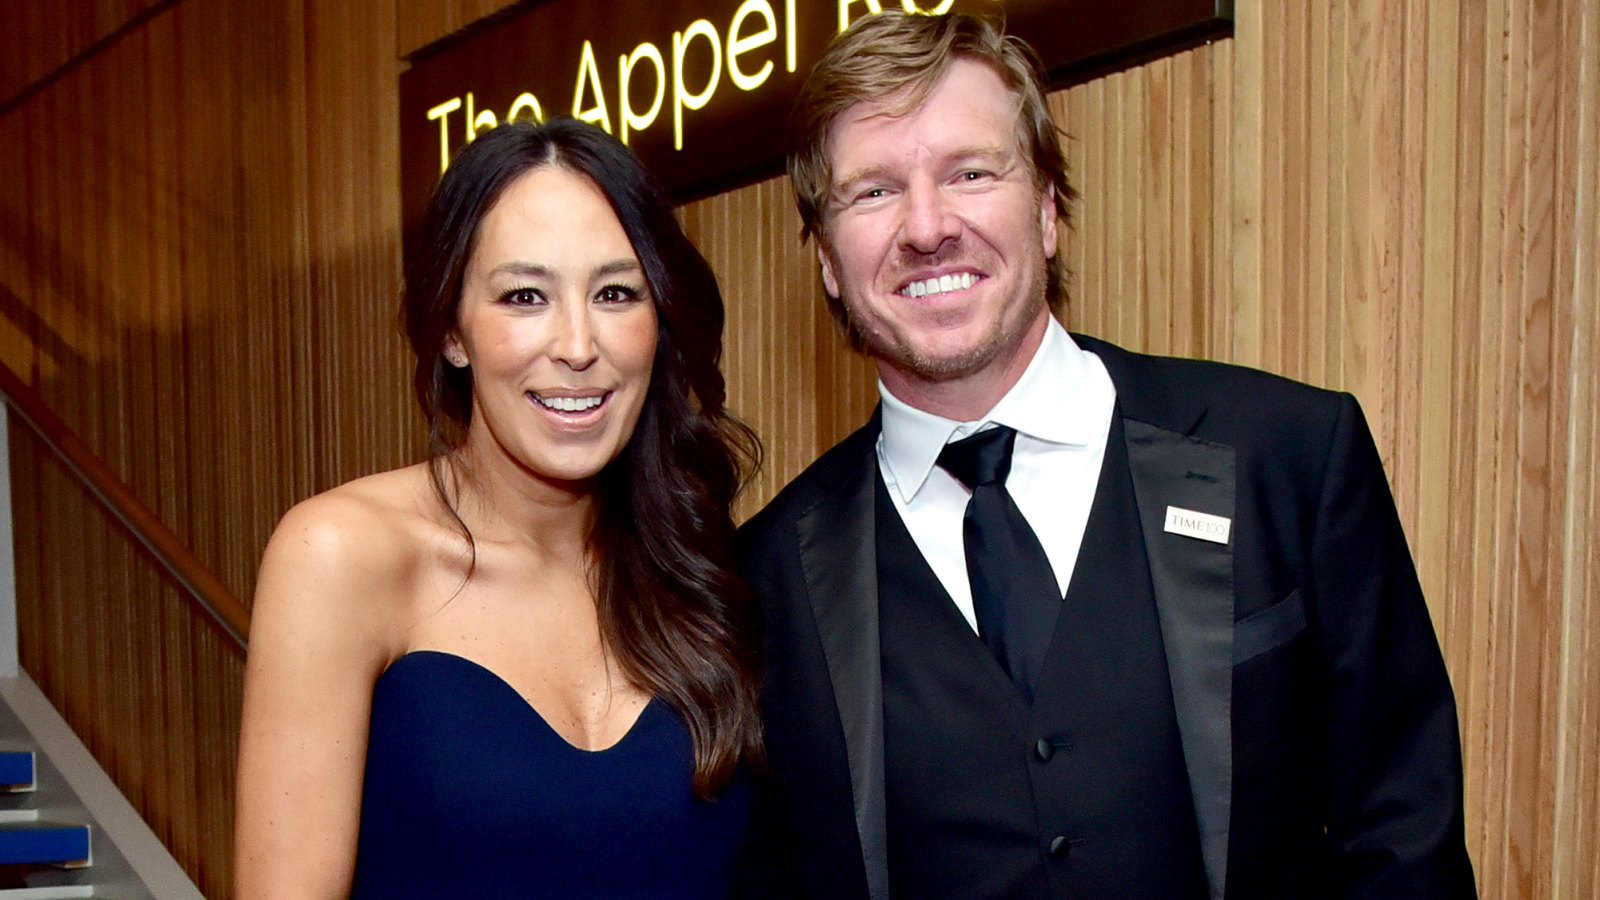 Joanna Gaines Jokes That Husband Chip Should Be Class President as They Complete Harvard Course